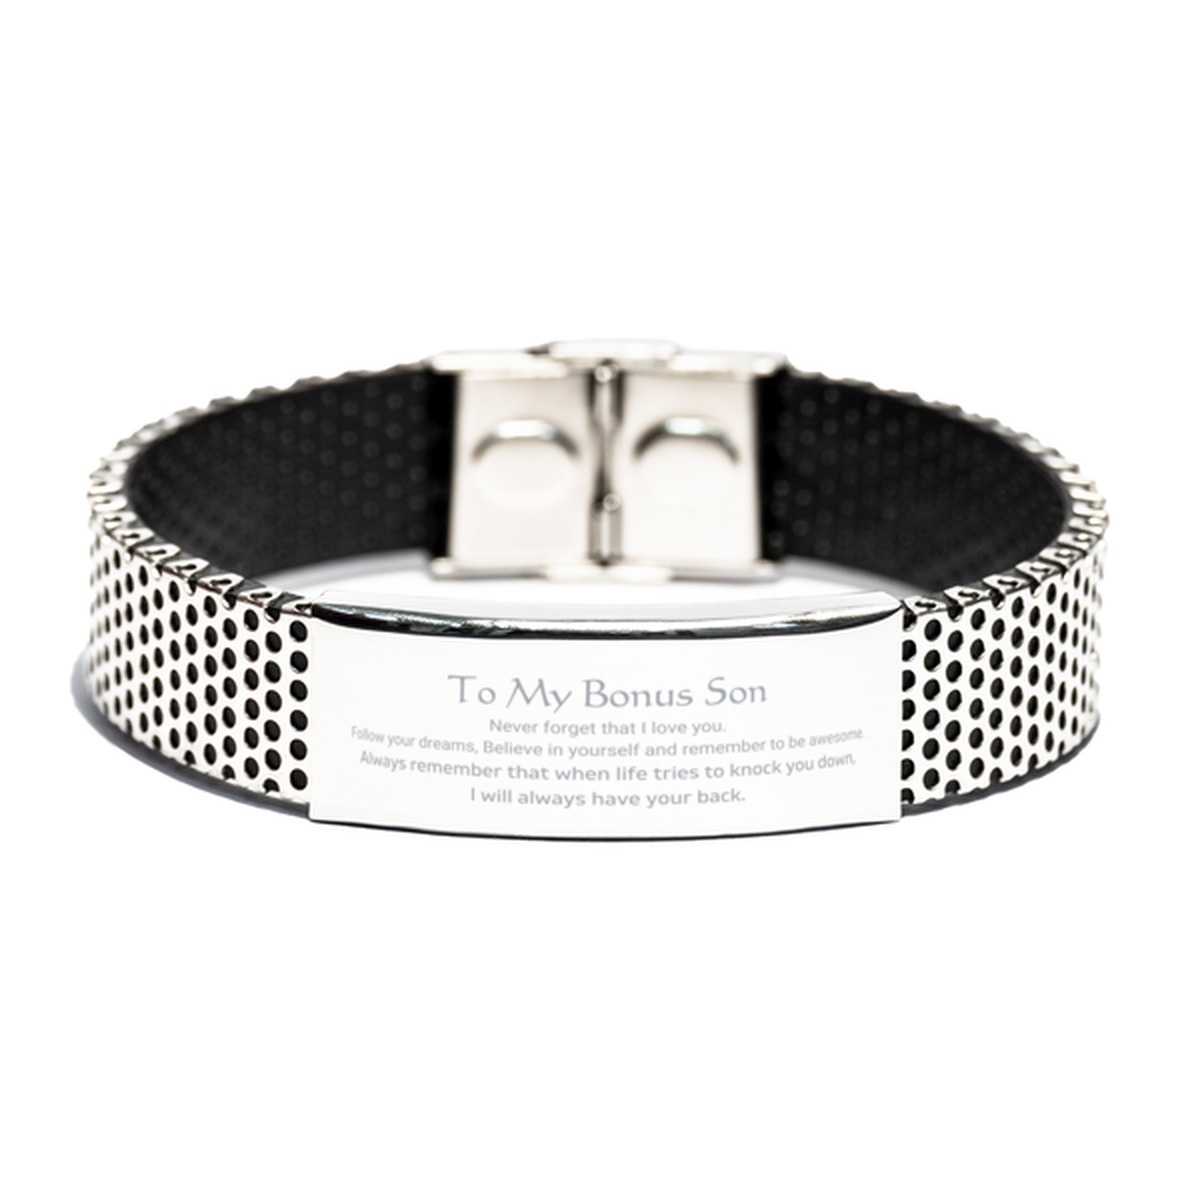 Inspirational Gifts for Bonus Son, Follow your dreams, Believe in yourself, Bonus Son Stainless Steel Bracelet, Birthday Christmas Unique Gifts For Bonus Son